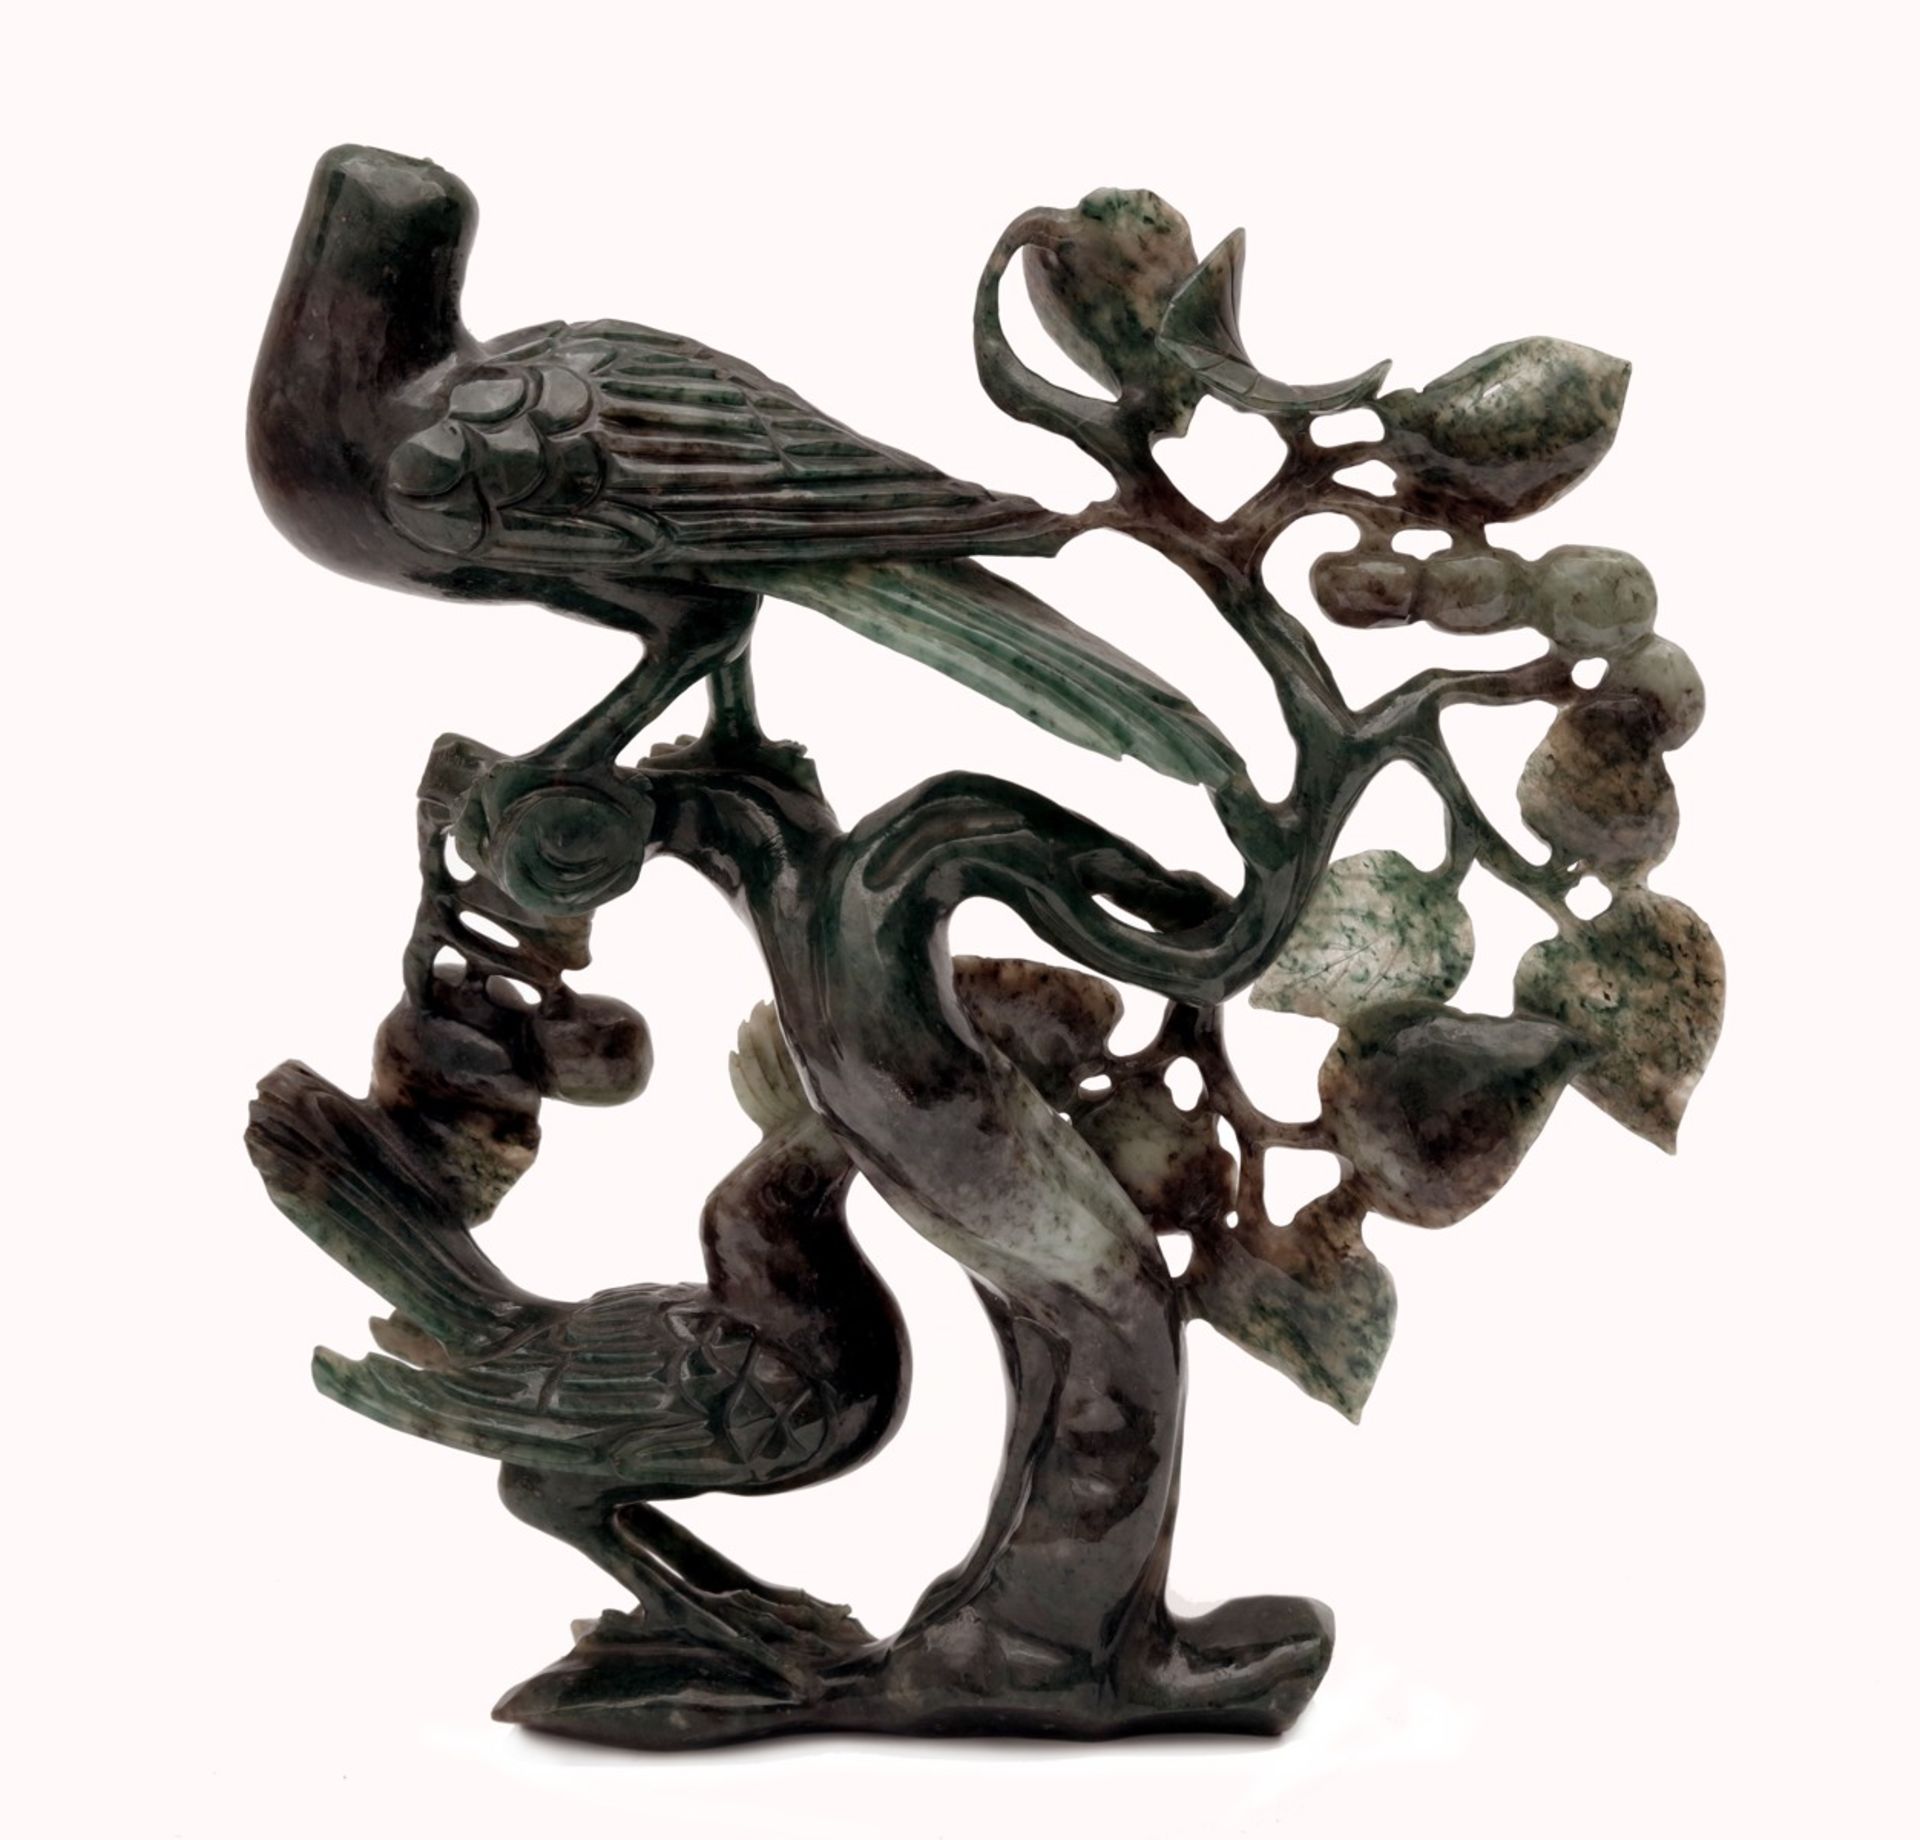 Carved Jade Statue Featuring Birds and Flowers - Image 2 of 2